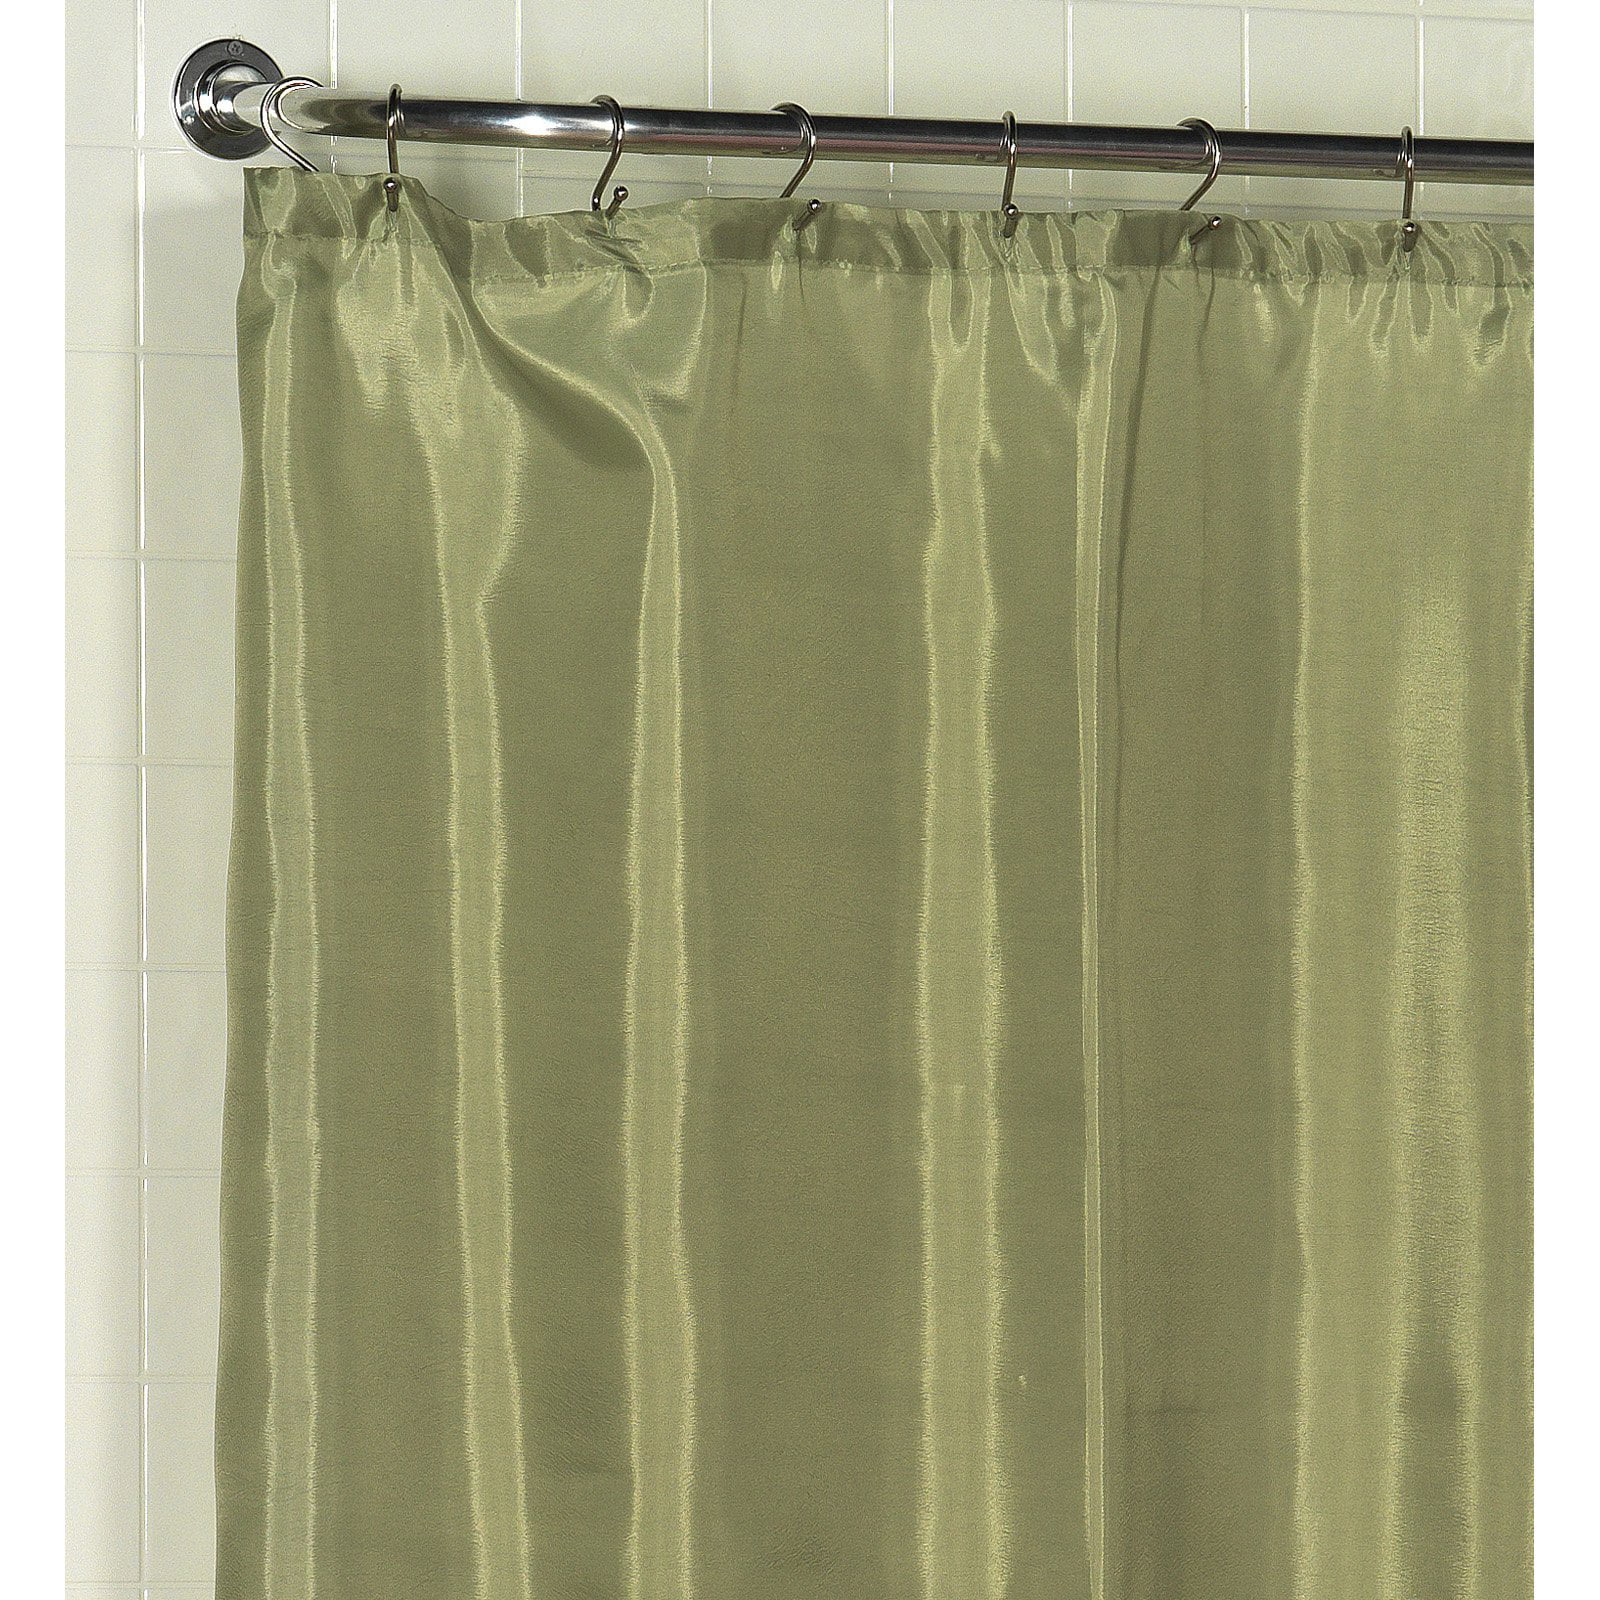 Polyester Fabric Shower Curtain Liner, Sage Fabric Shower Curtain